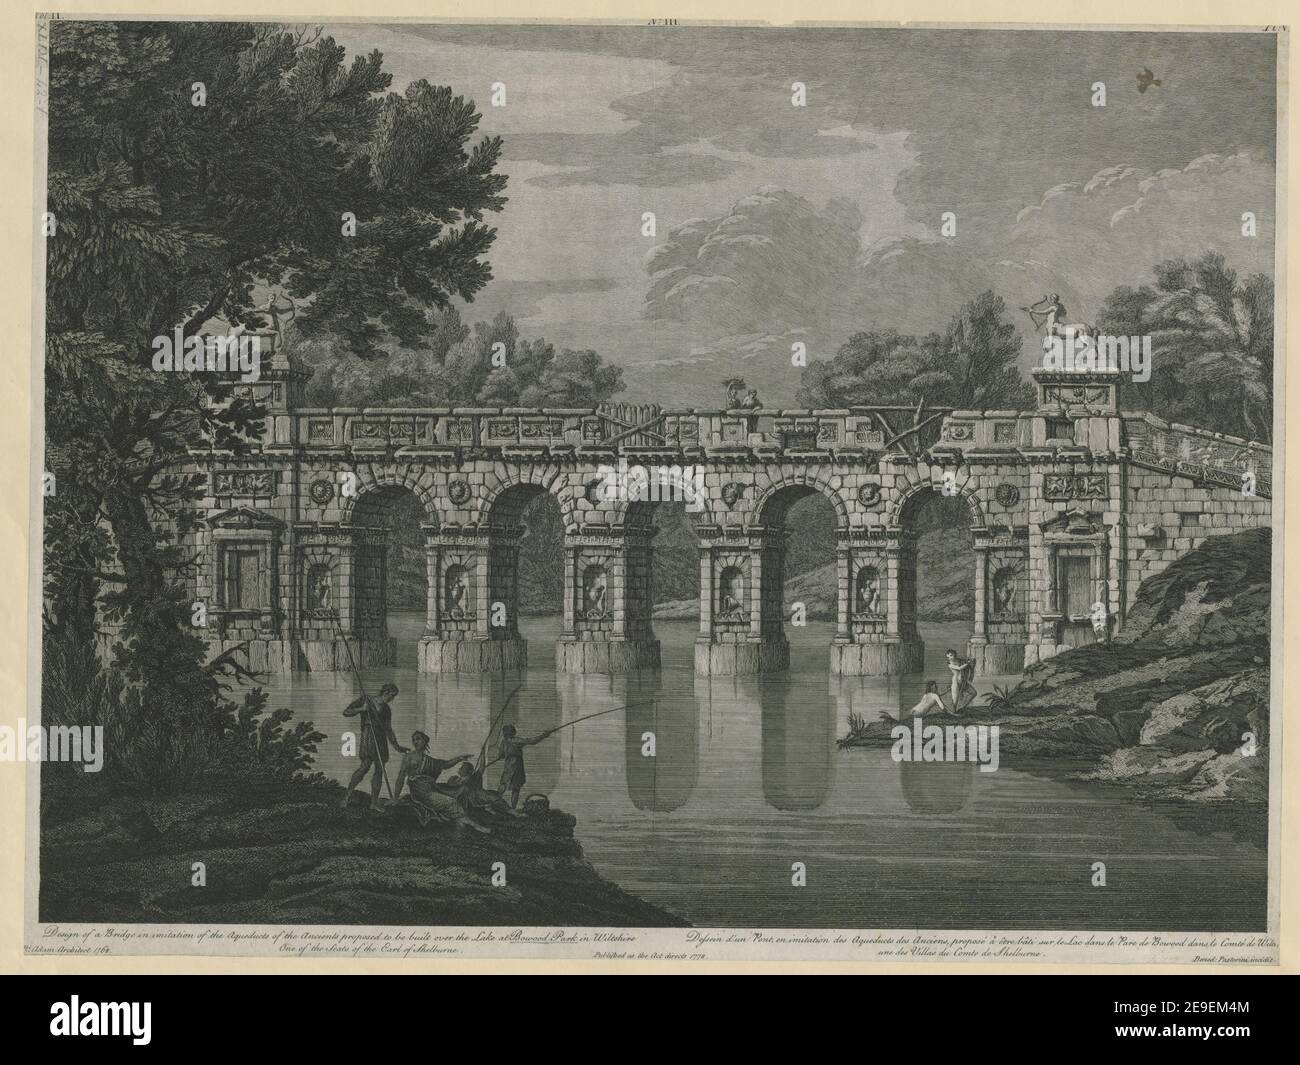 Design of a Bridge in imitation of the Aqueducts of the Ancients proposed to be built over the Lake at Bowood Park in Wiltshire One of the Seats of the Earl of Wiltshire. = Dessein d'un Pont, en imitation des Aqued Author  Pastorini, Benedetto 43.42.1. Place of publication: [England] Publisher: Published as the Act directs, Date of publication: 1778.  Item type: 1 print Medium: etching and engraving Dimensions: sheet  Former owner: George III, King of Great Britain, 1738-1820 Stock Photo